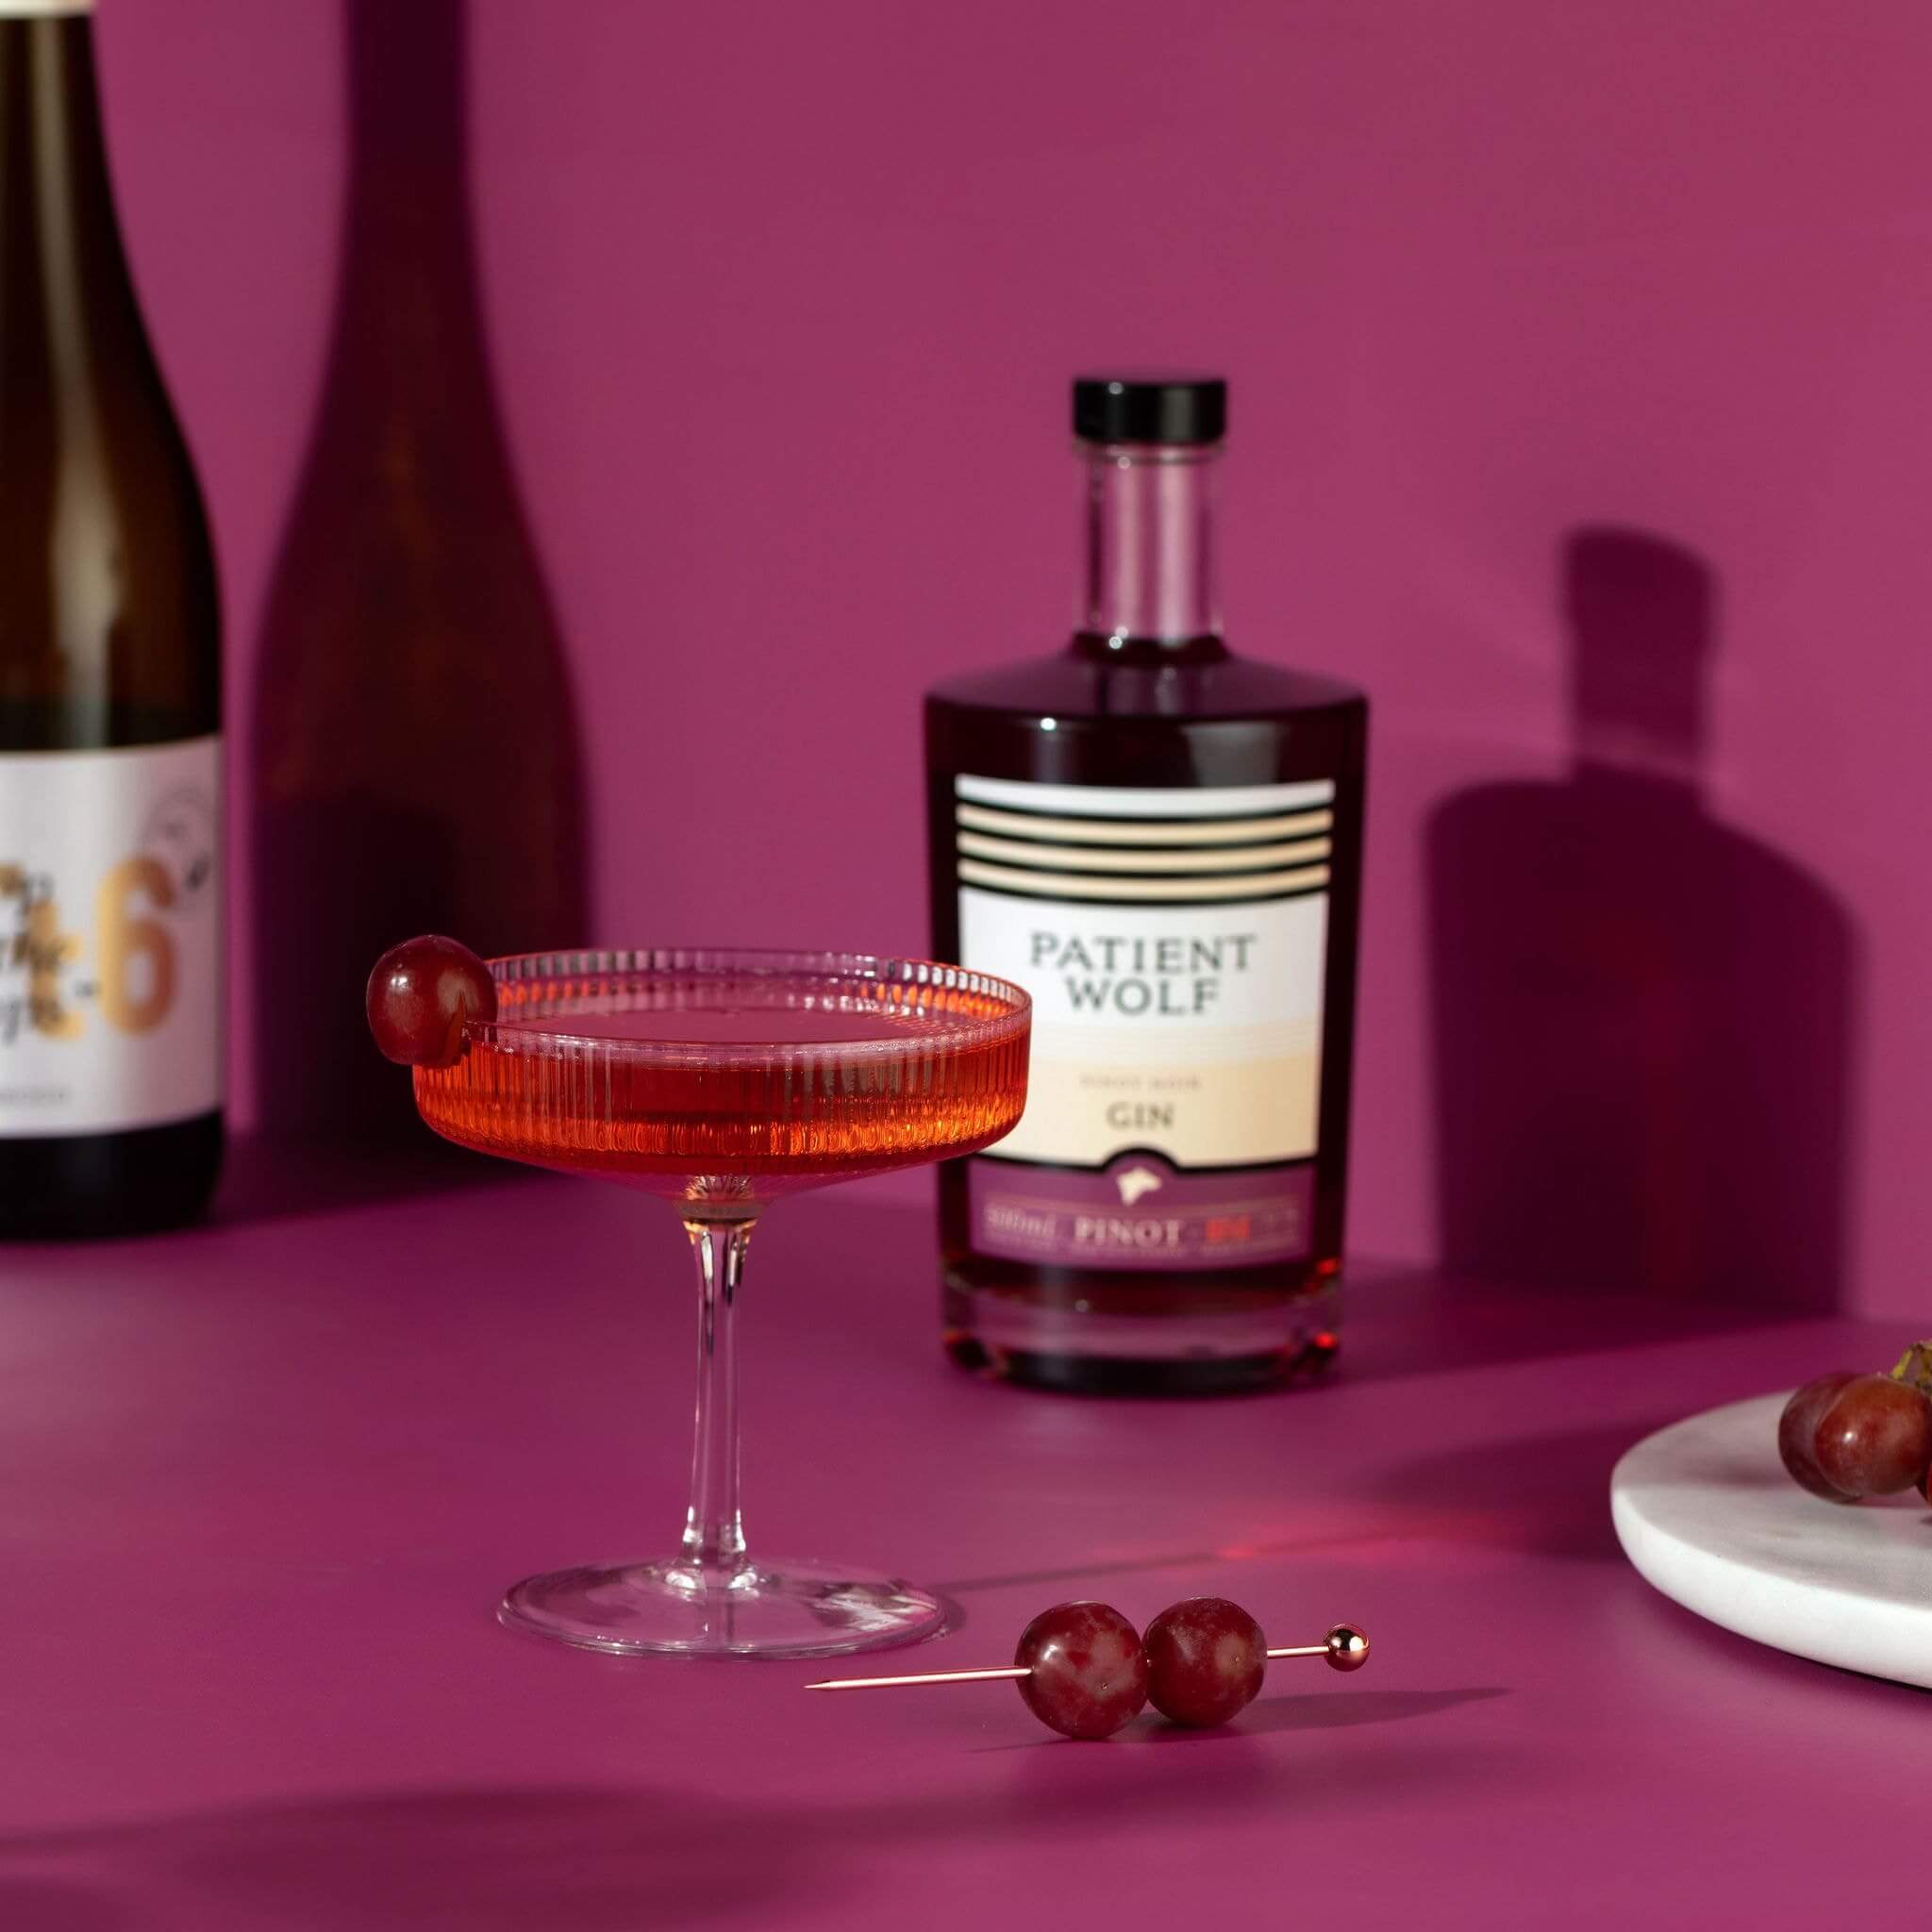 6Ft6 Wines has released a Pinot Noir Gin!